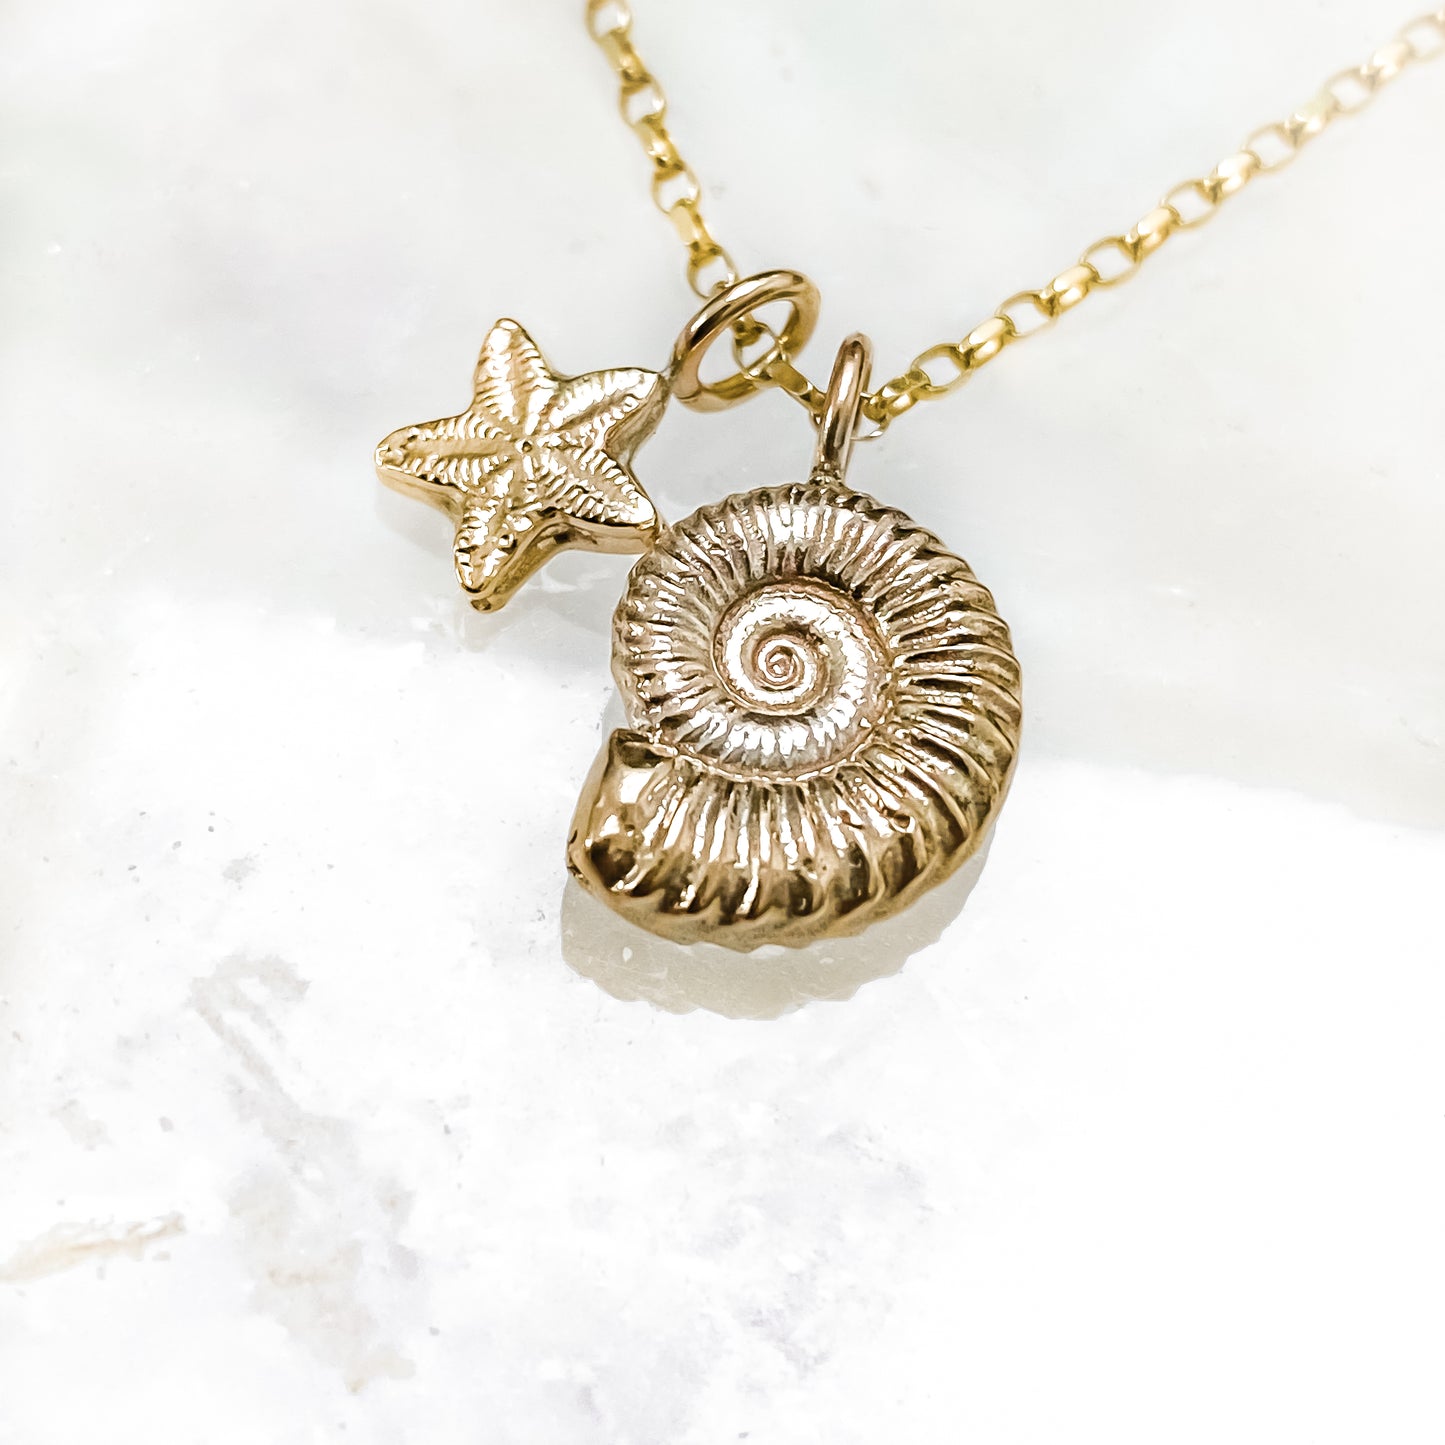 Gold Ammonite and Crinoid Fossil Charm Necklace